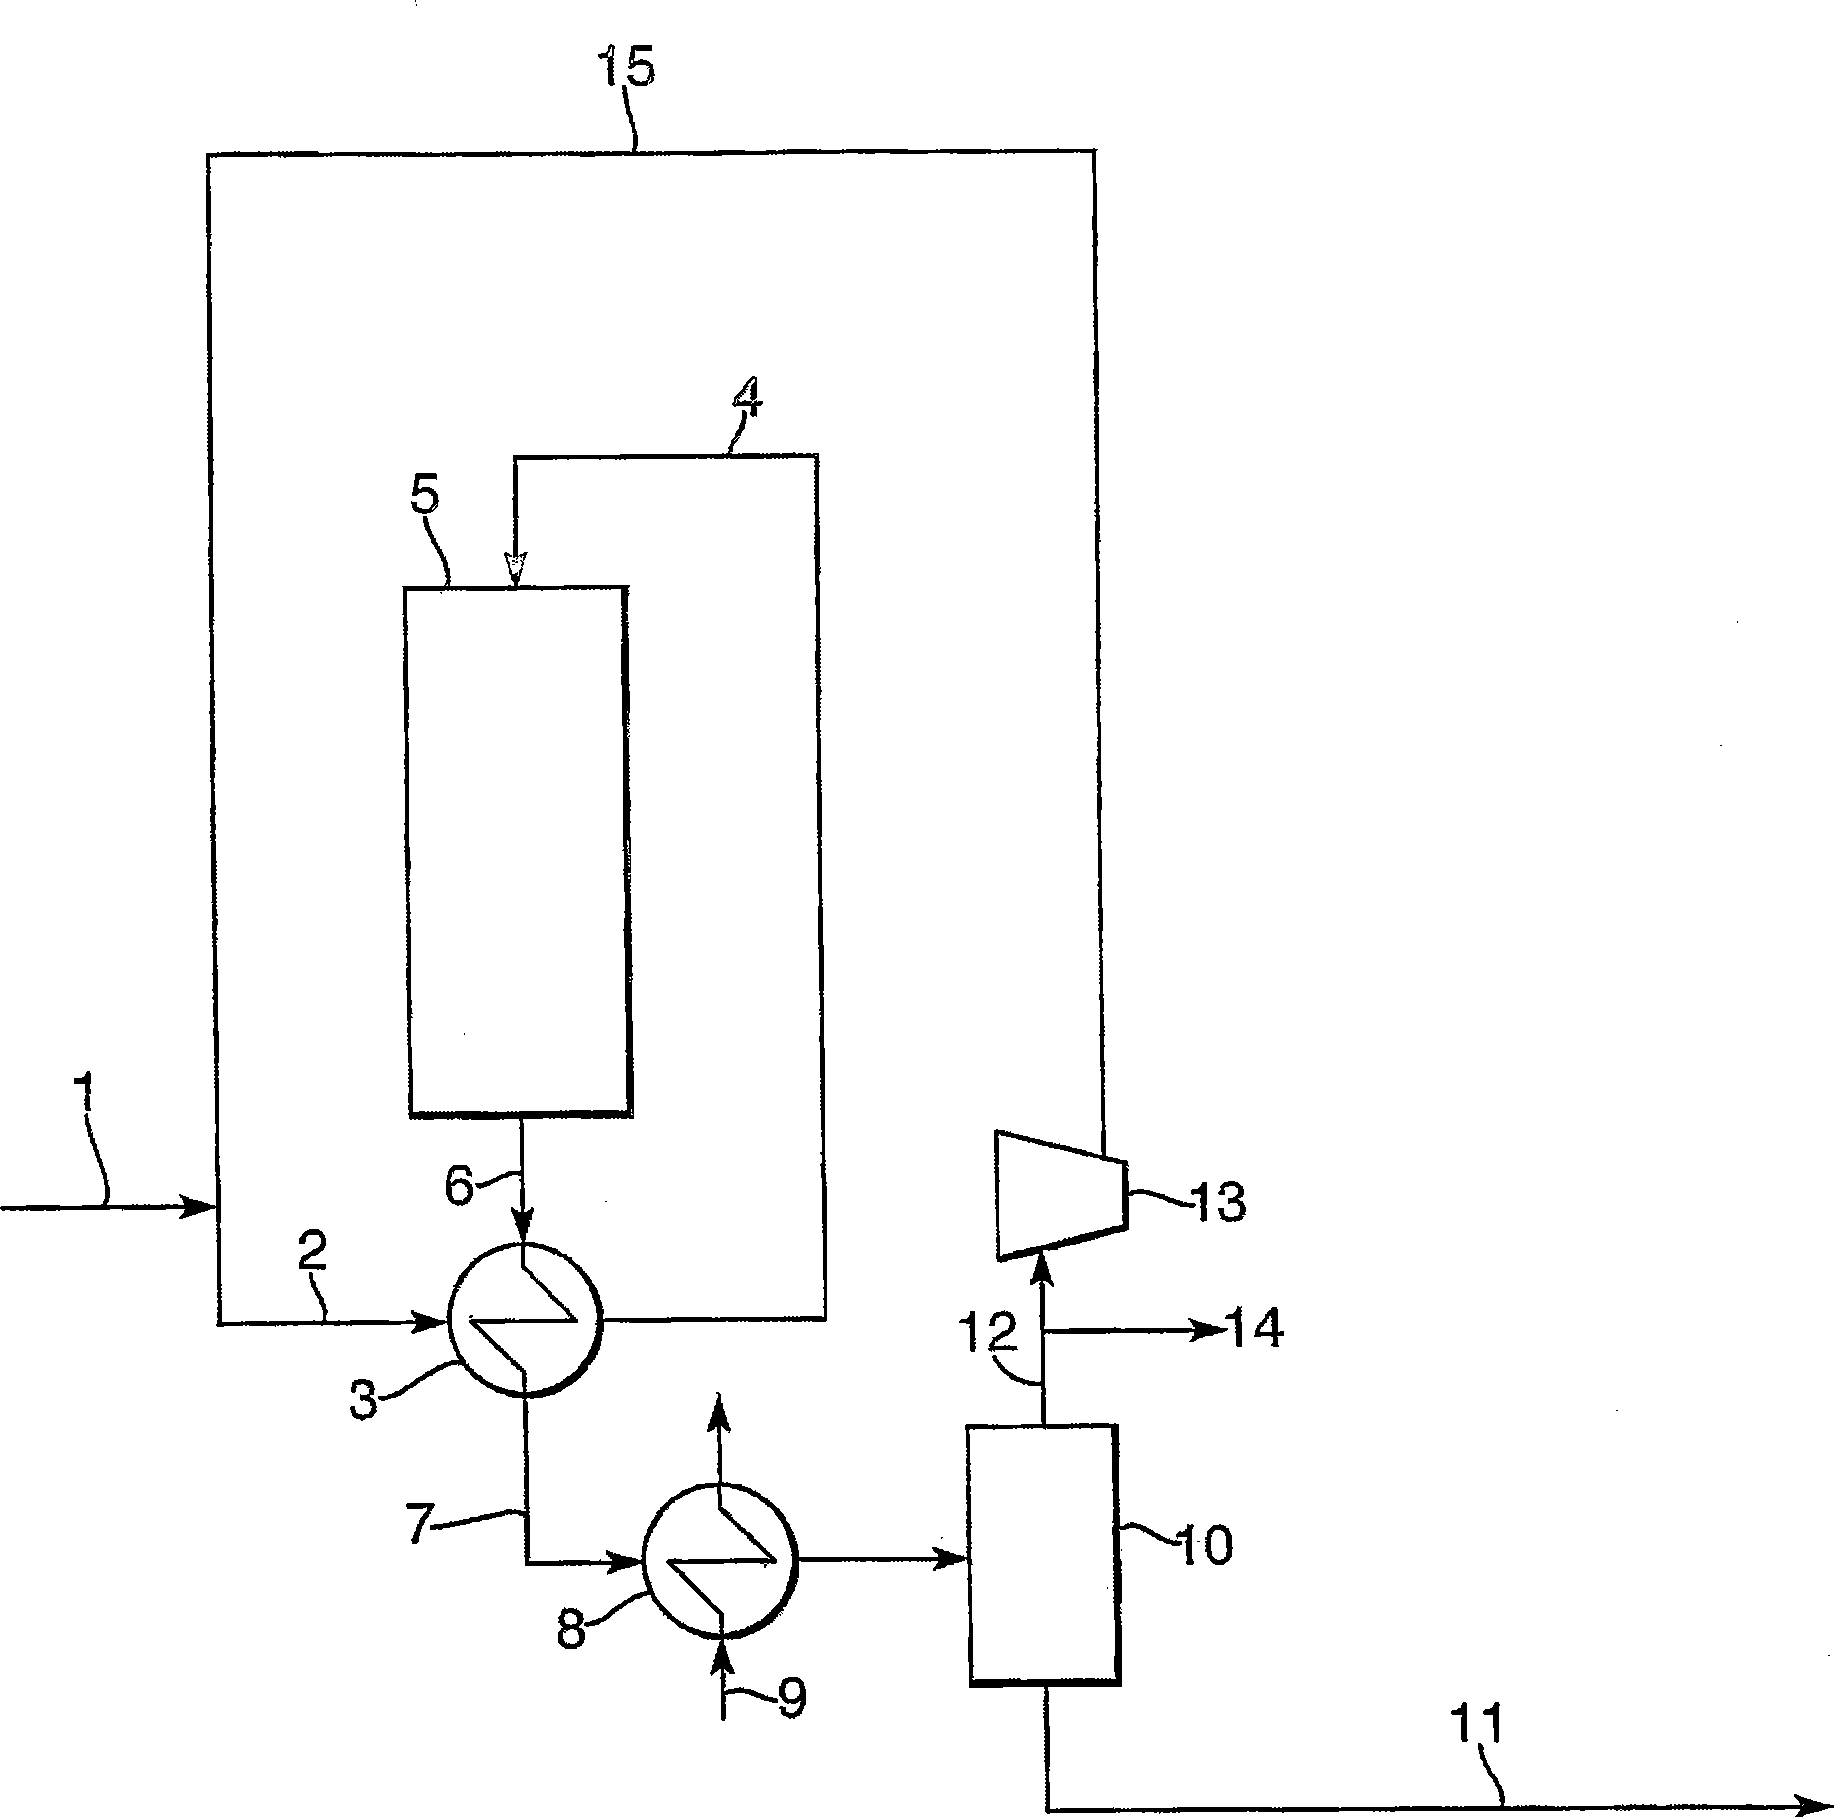 Process for gas phase reactions